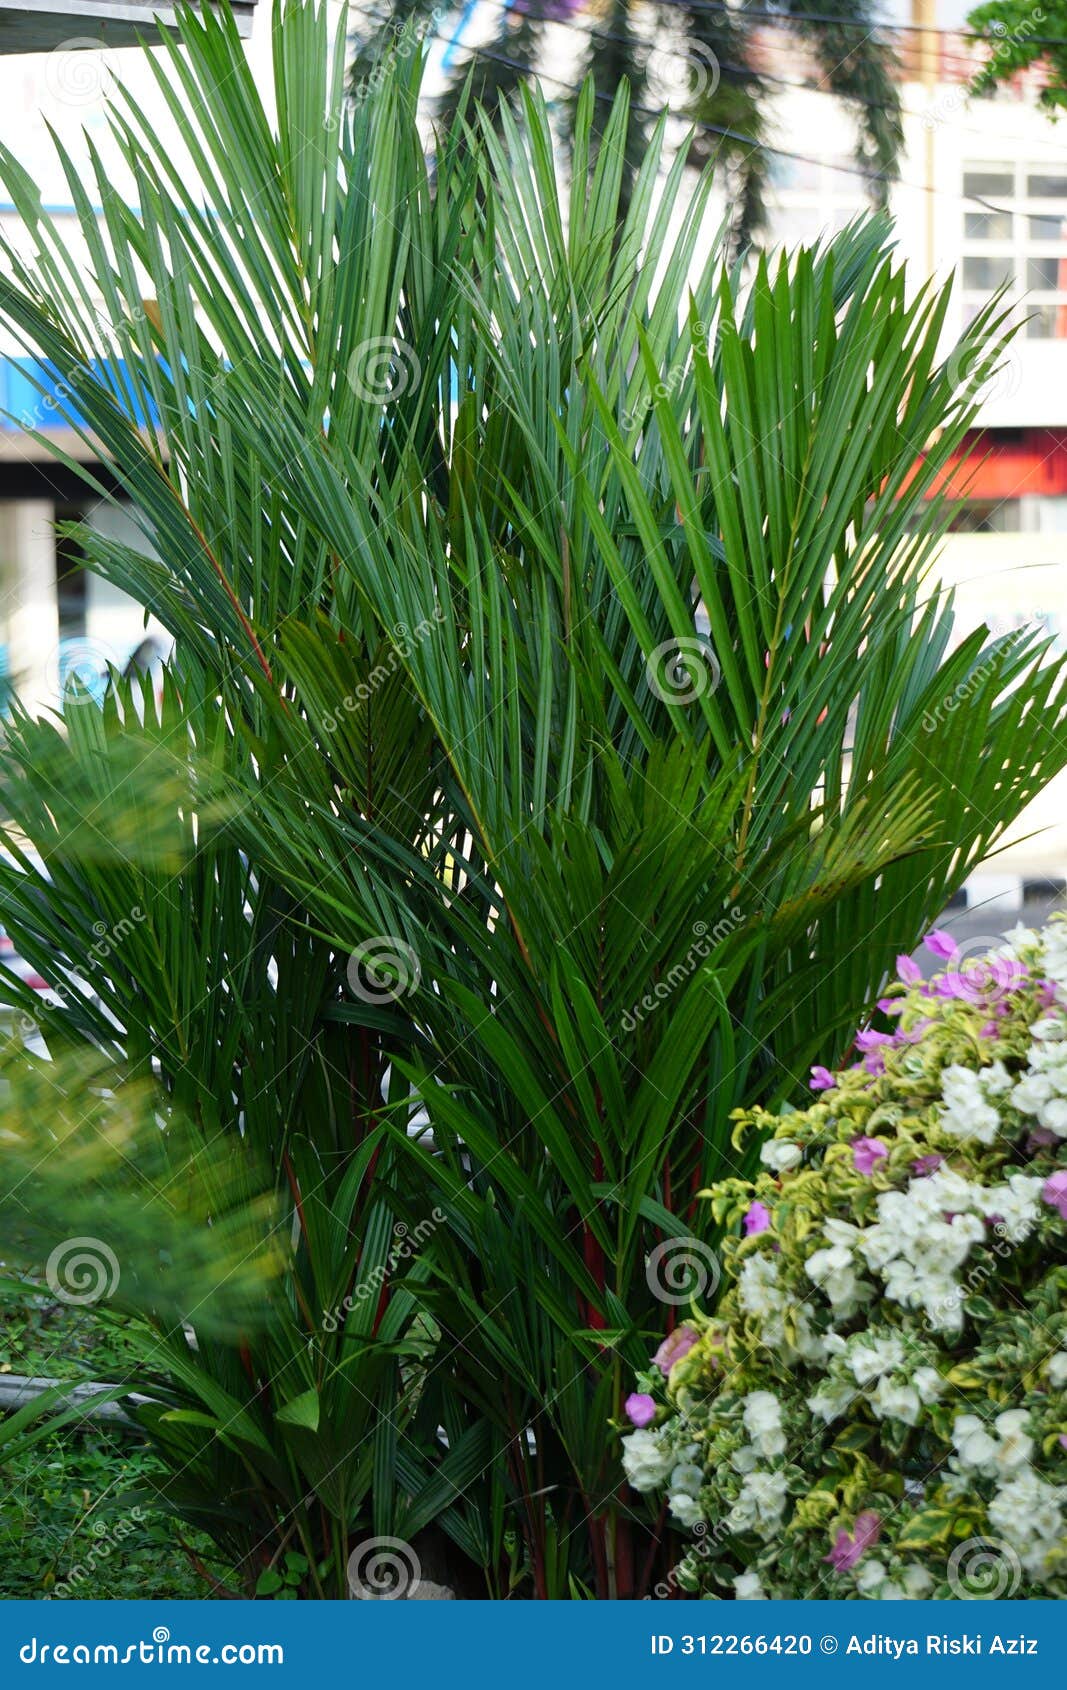 cyrtostachys renda (also known red sealing wax palm, red palm, rajah palm) in the garden